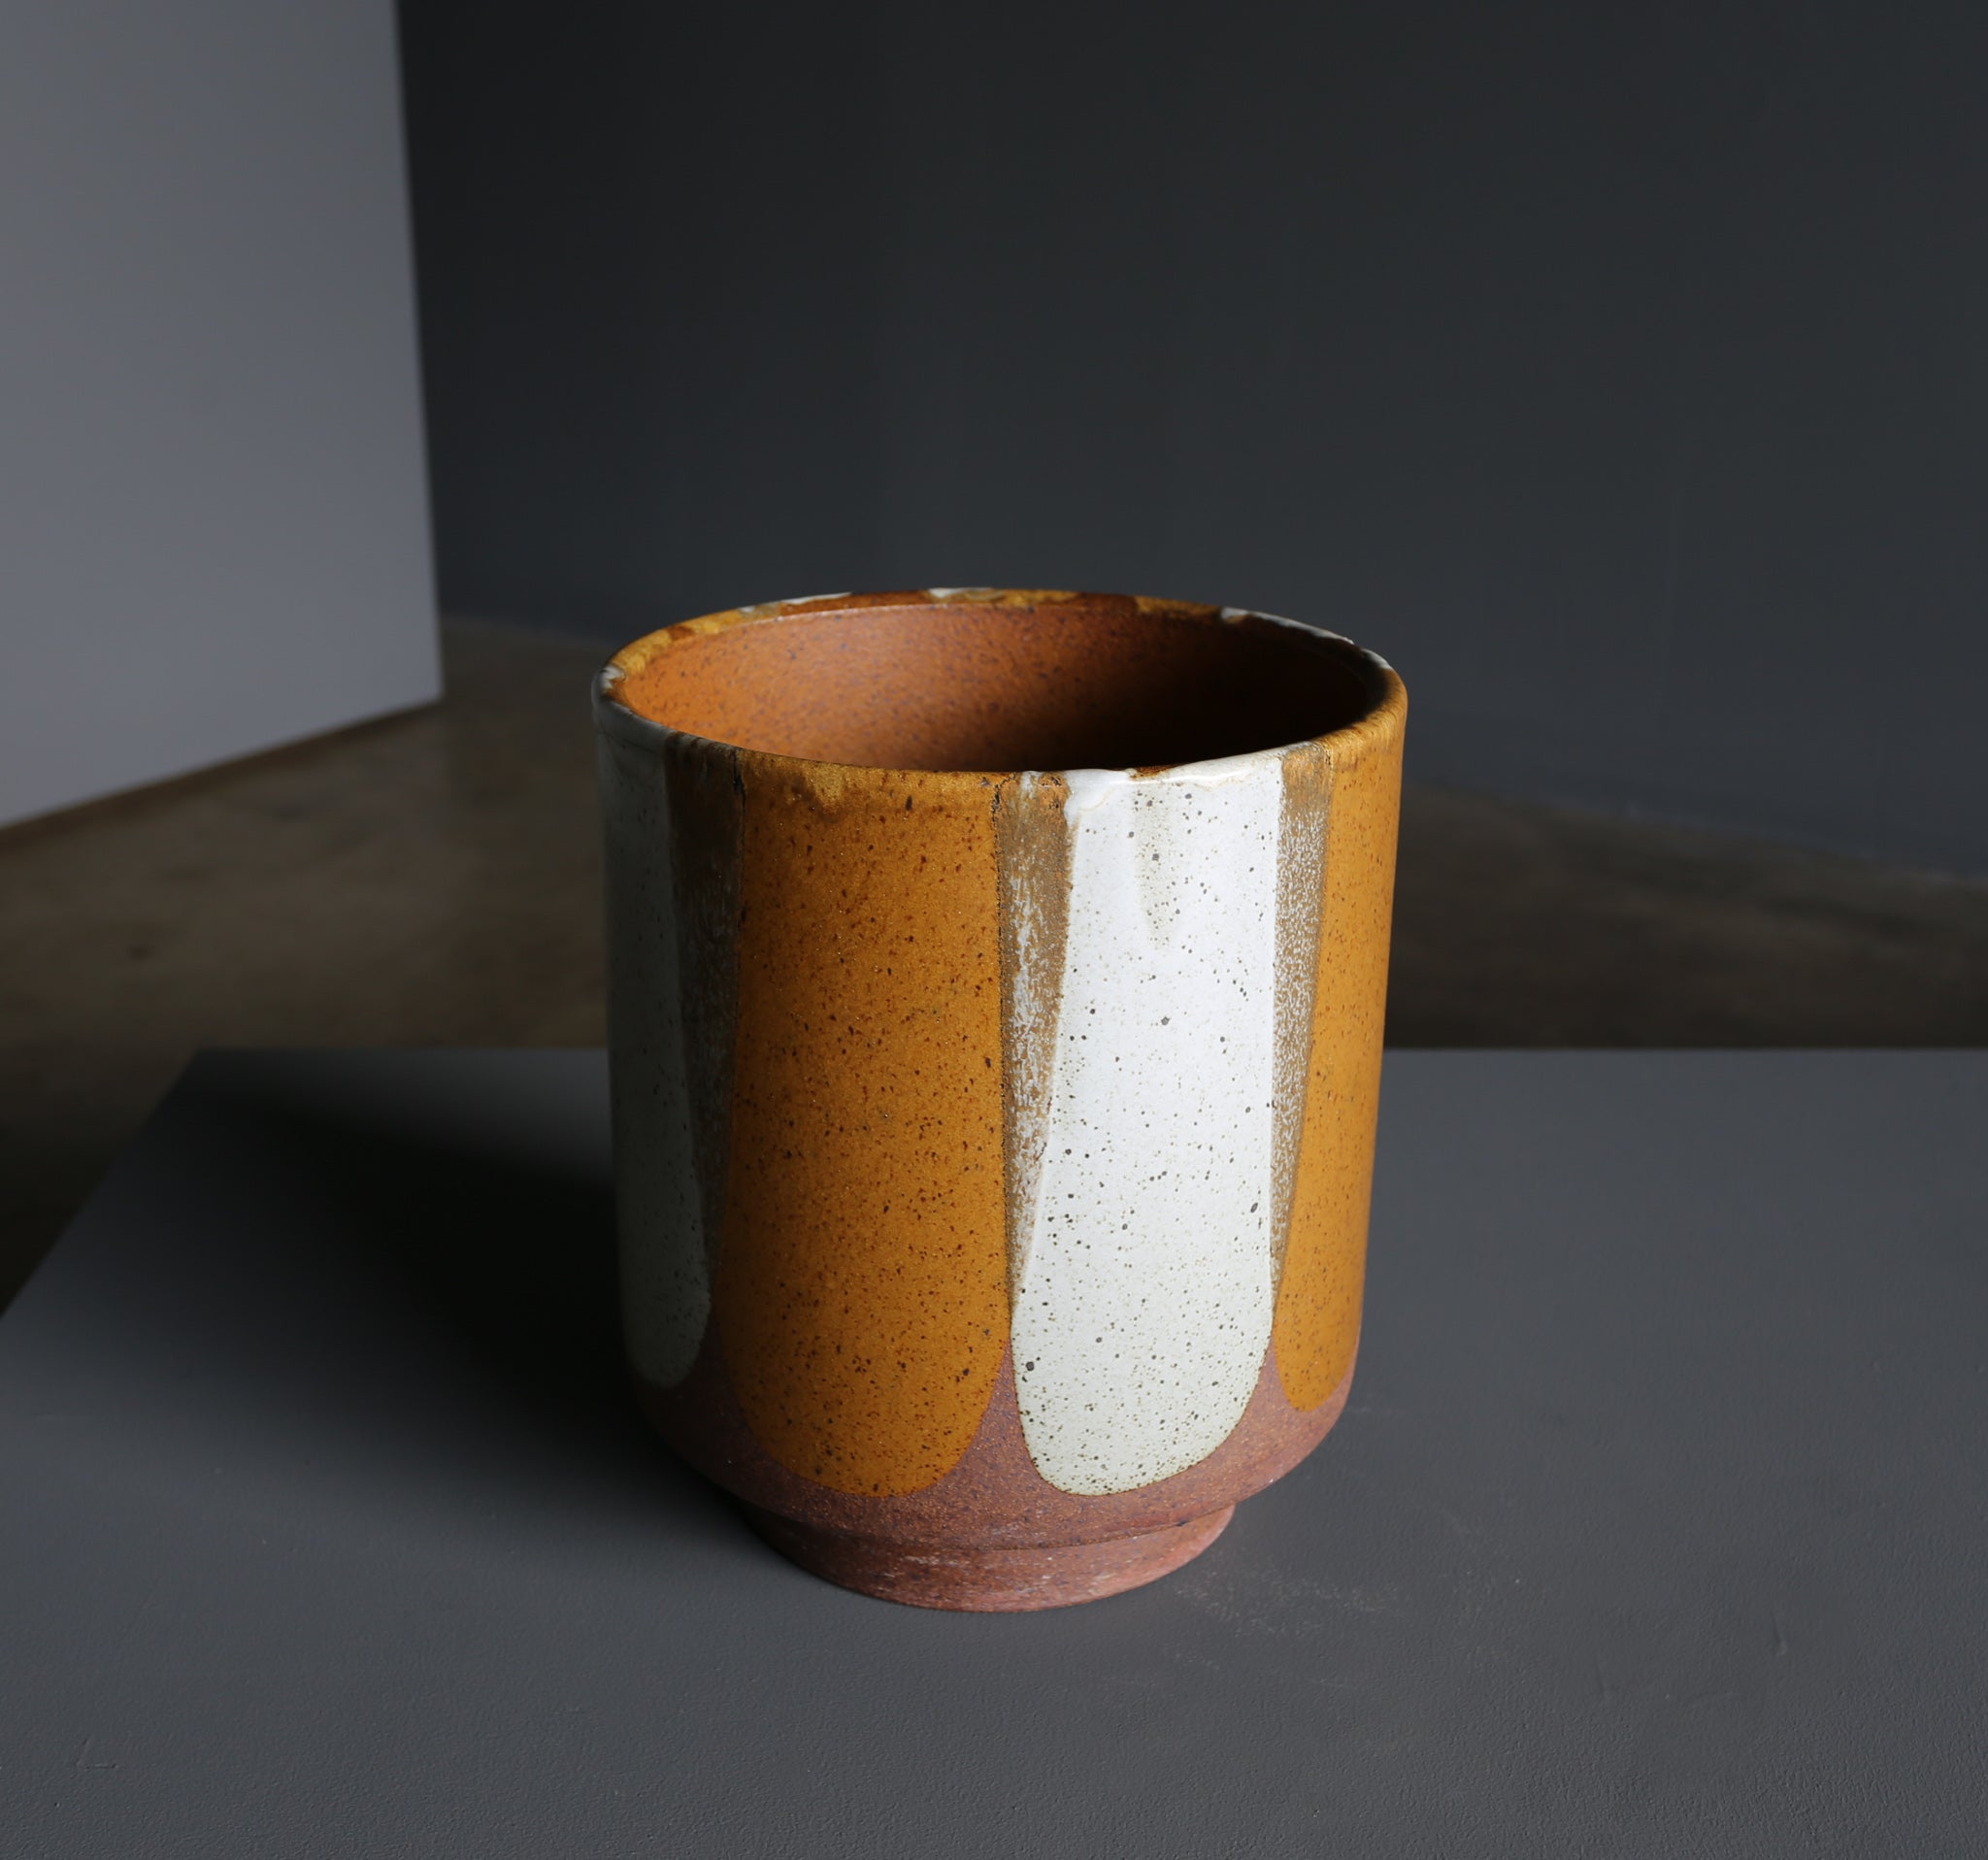 = SOLD = David Cressey " Flame " Glaze Planter for Architectural Pottery circa 1970